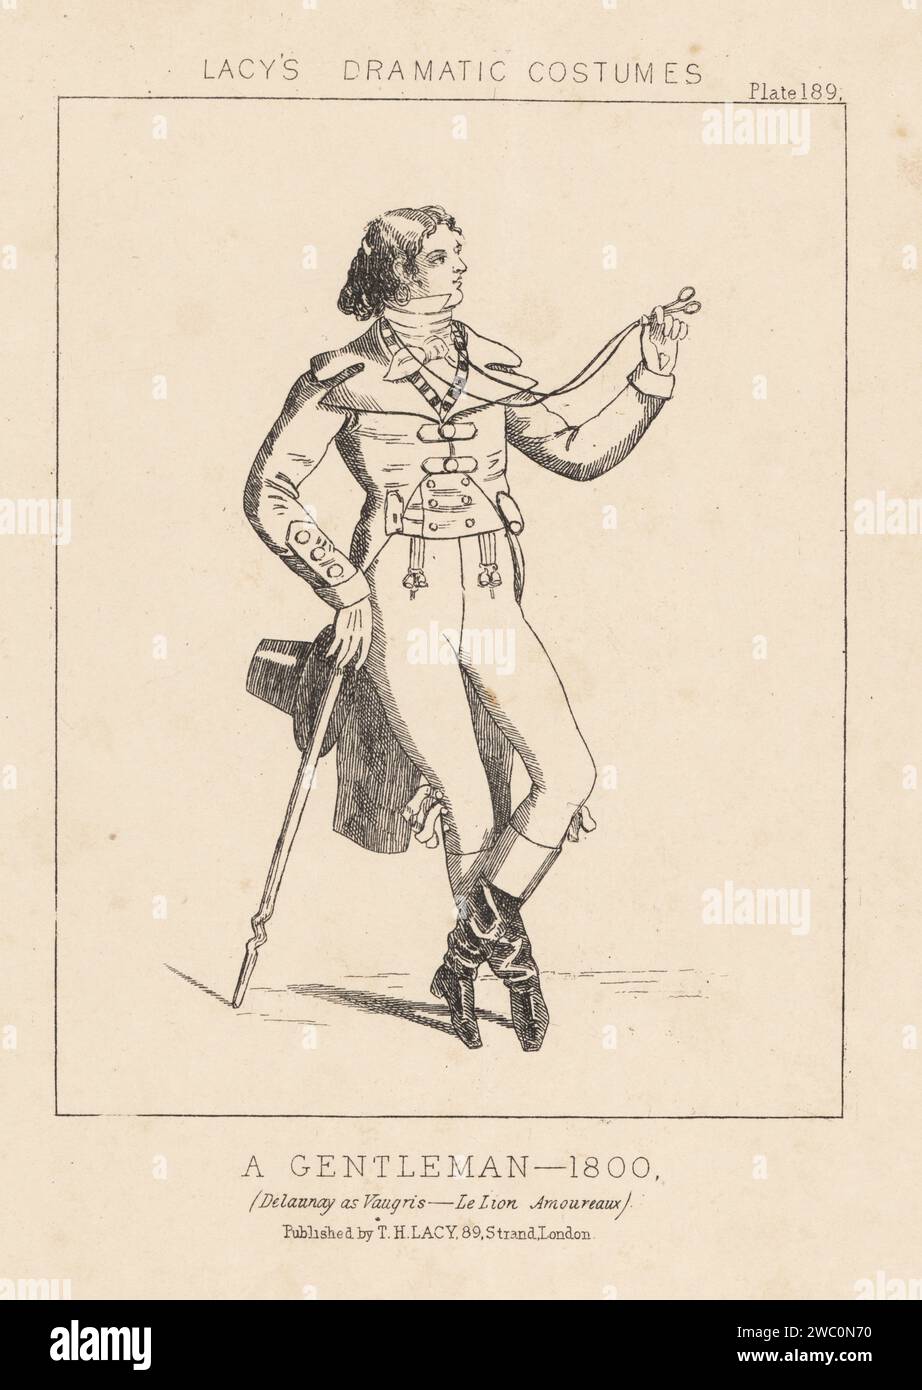 French actor Louis-Arsène Delaunay as Vaugris in Le Lion Amoureux by Francois Ponsard at the Theatre Francais, 1866. In costume of a gentleman of 1800. Fop in riding coat, cravatte, breeches, boots, holding a lorgnette and cane. Lithograph from Thomas Hailes Lacy's Male Costumes, Historical, National and Dramatic in 200 Plates, London, 1865. Lacy (1809-1873) was a British actor, playwright, theatrical manager and publisher. Stock Photo